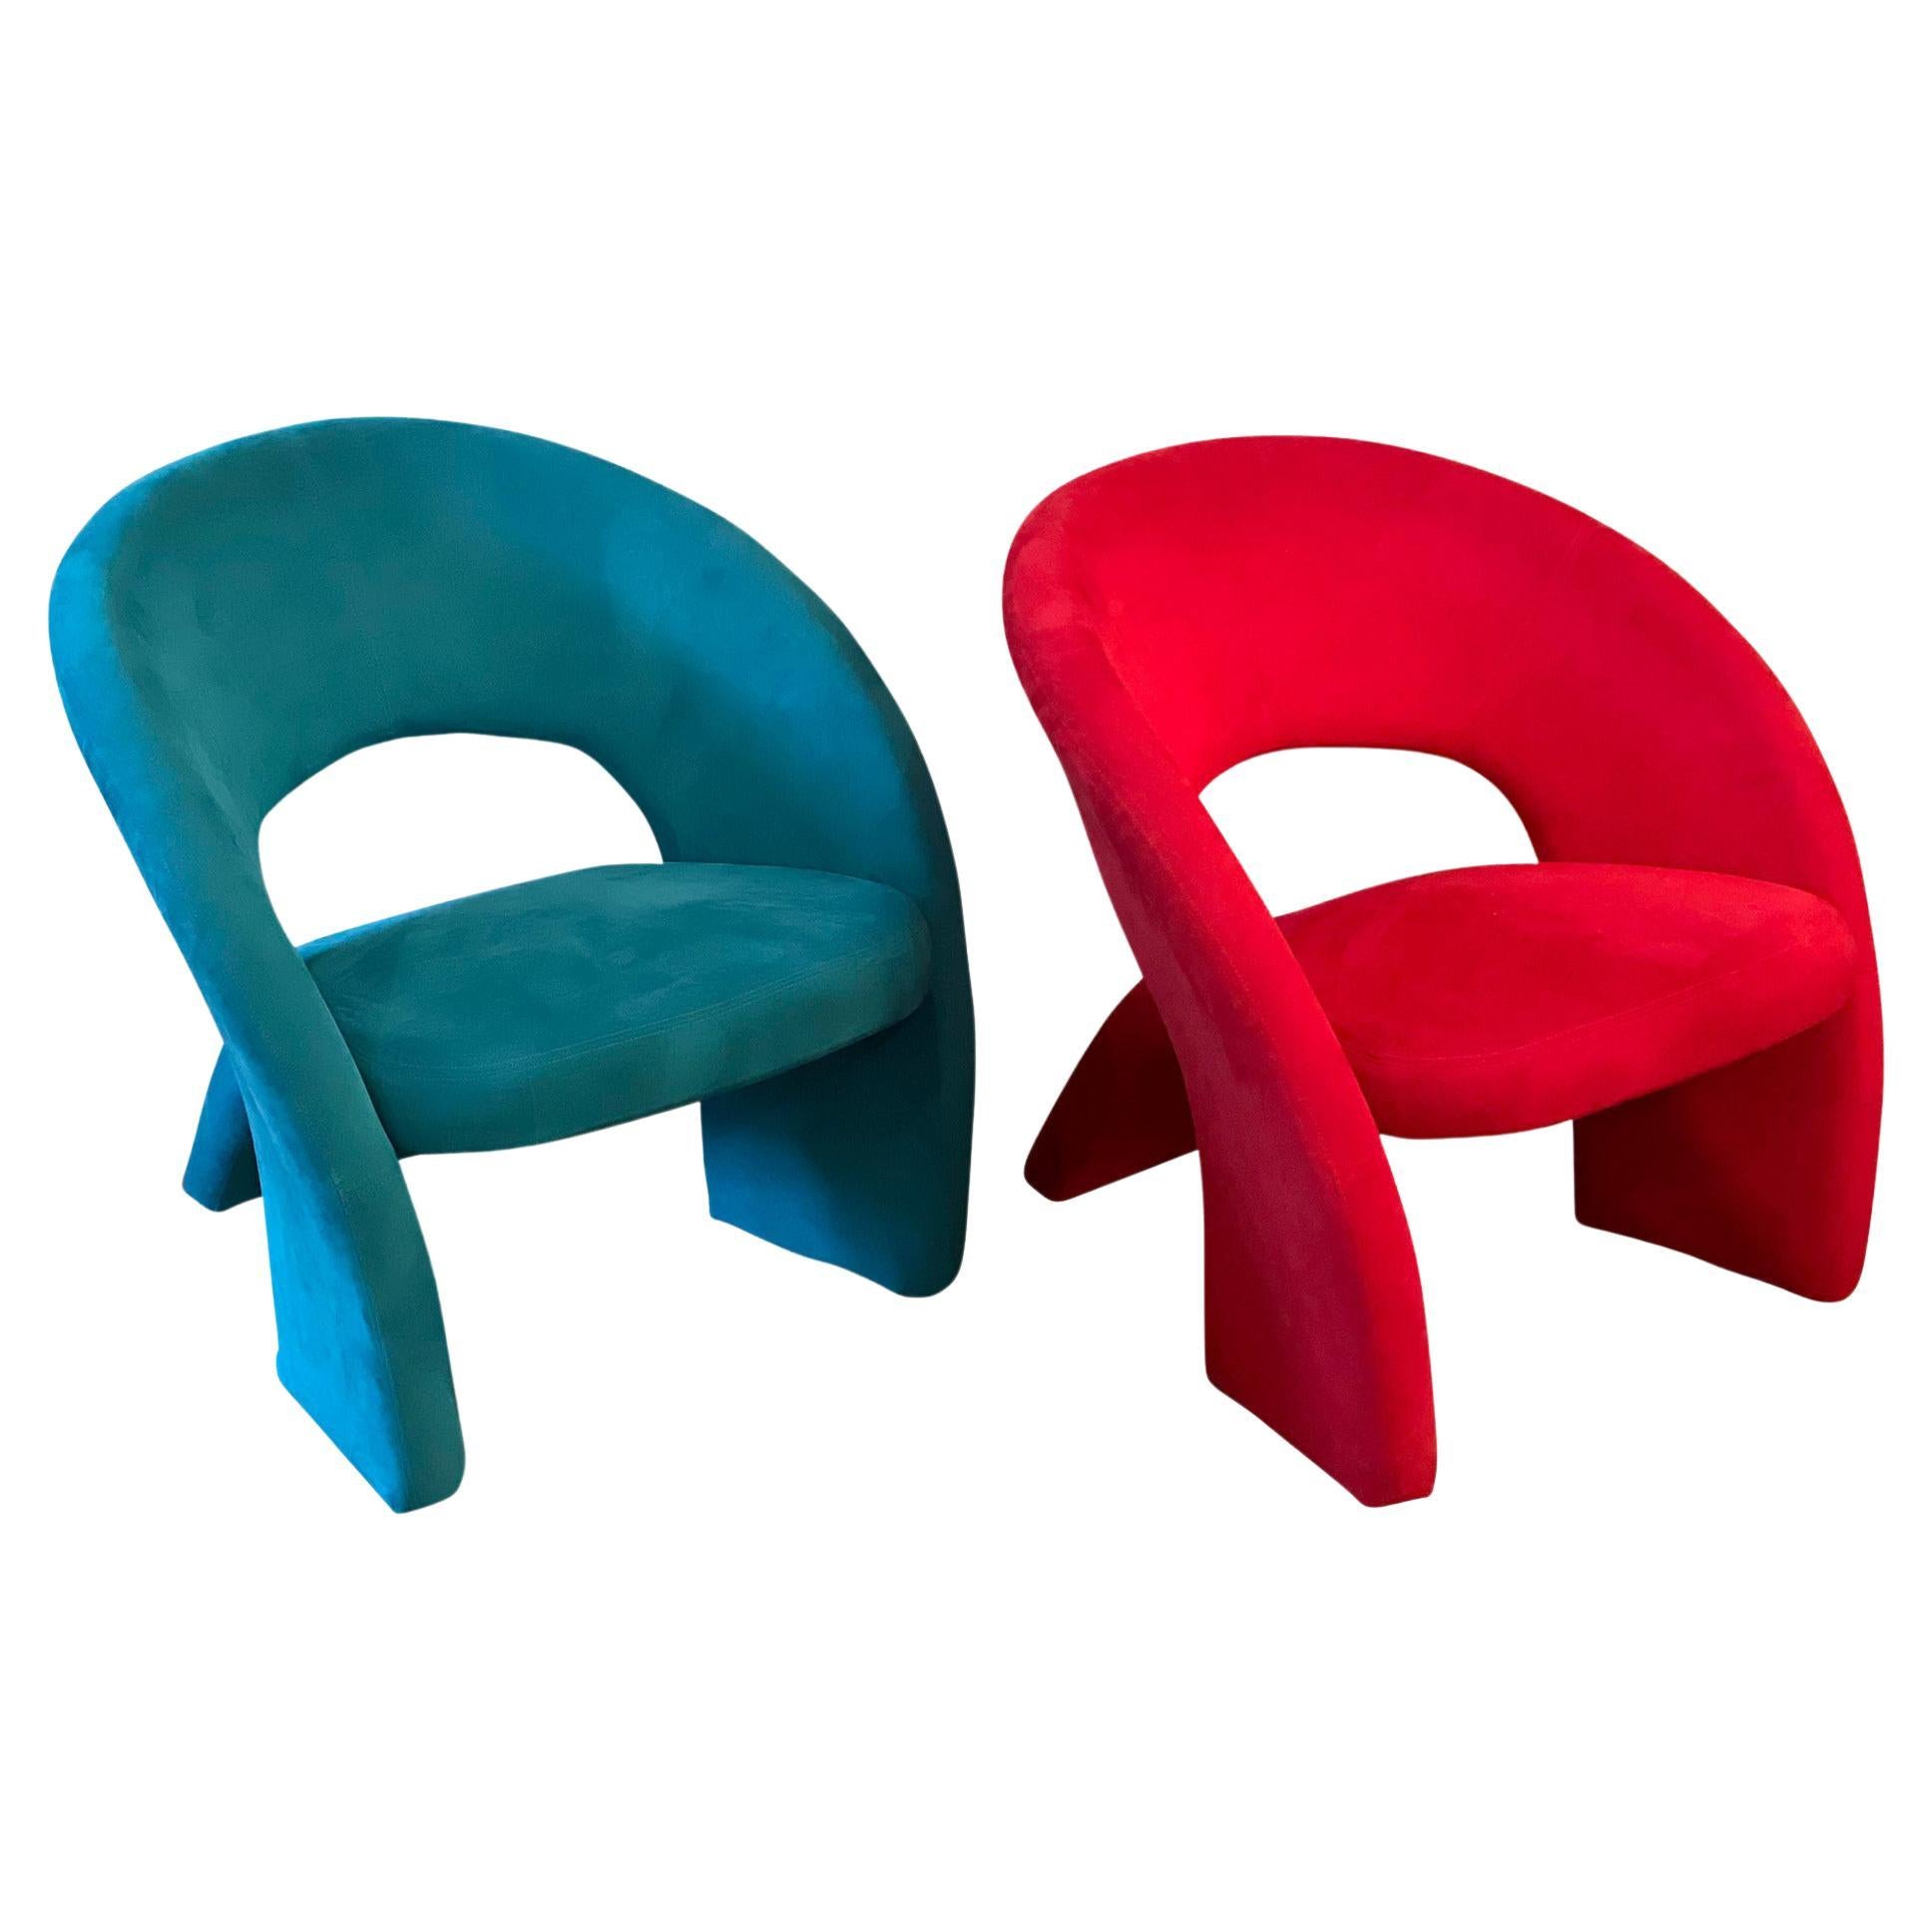 1980s Postmodern Sculptural Chairs in the Manner of Jaymar, a Pair